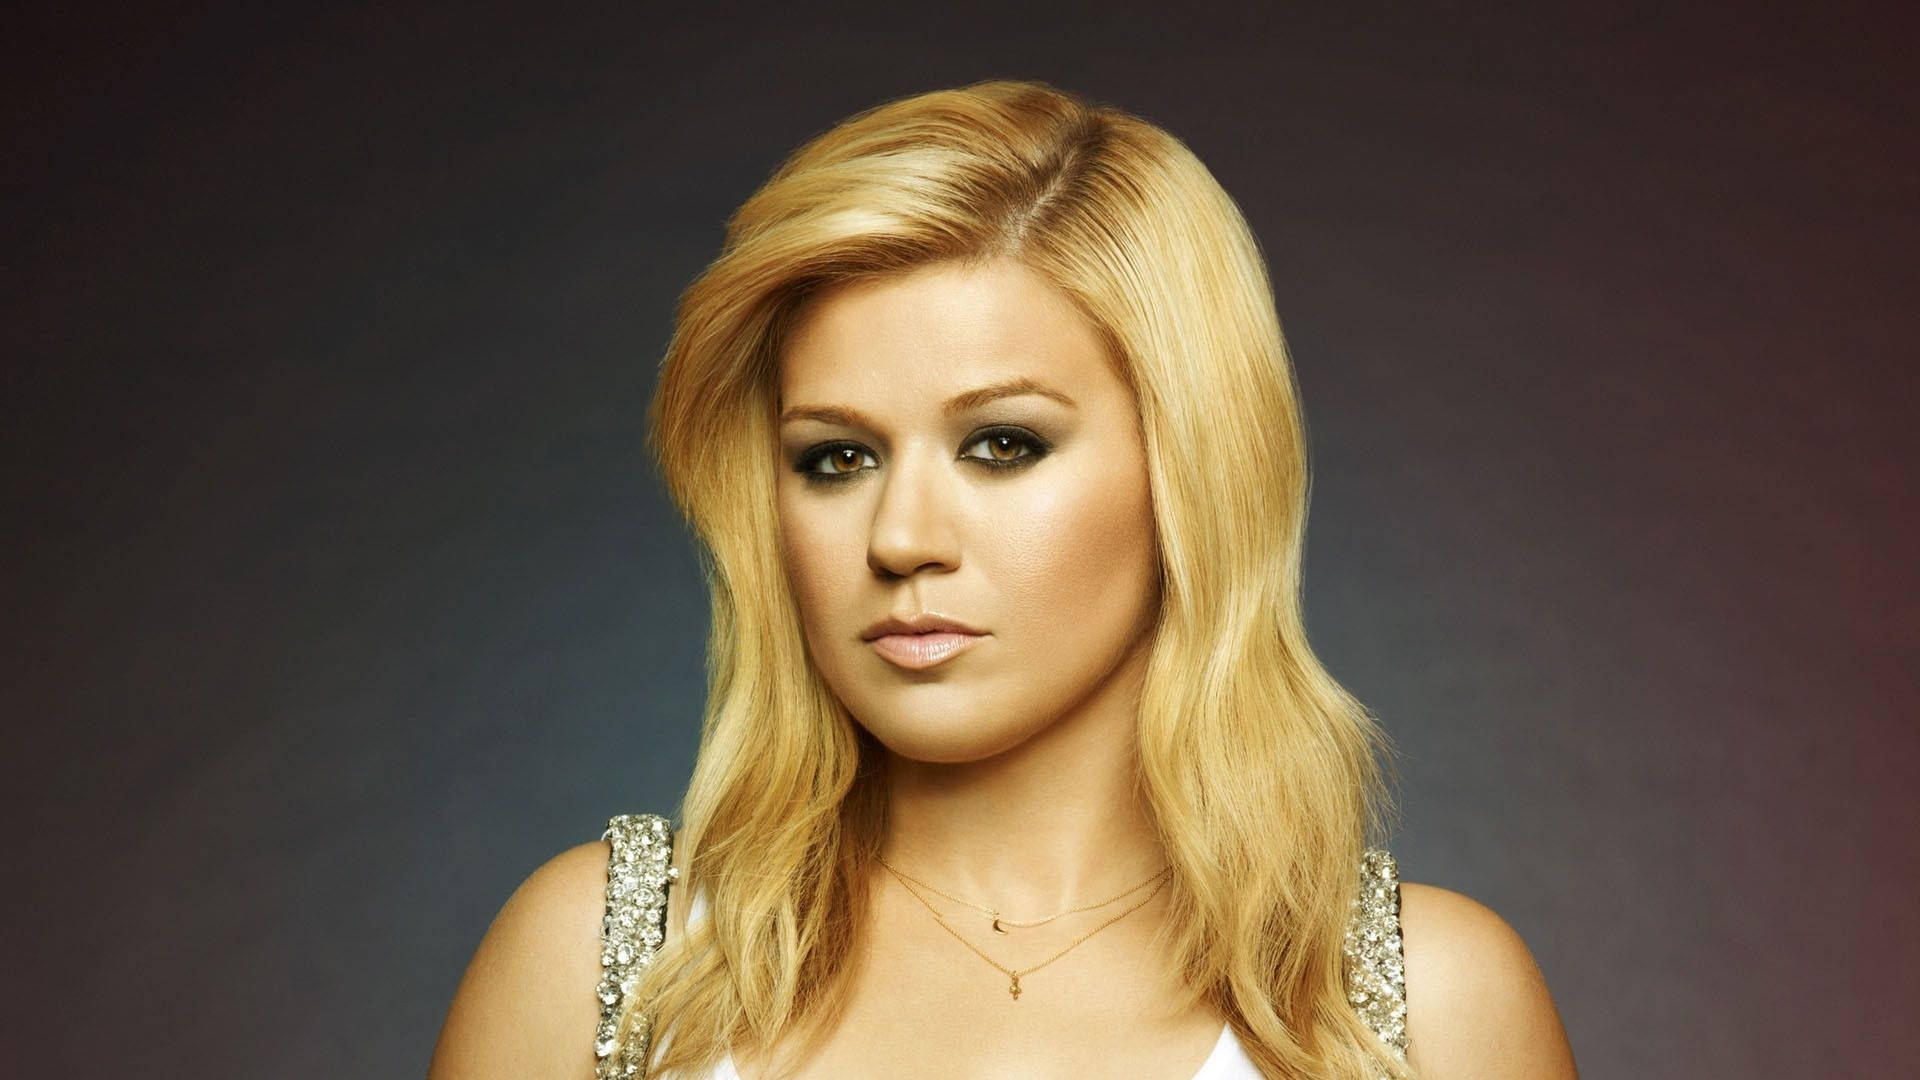 Kelly Clarkson Bold Look Background